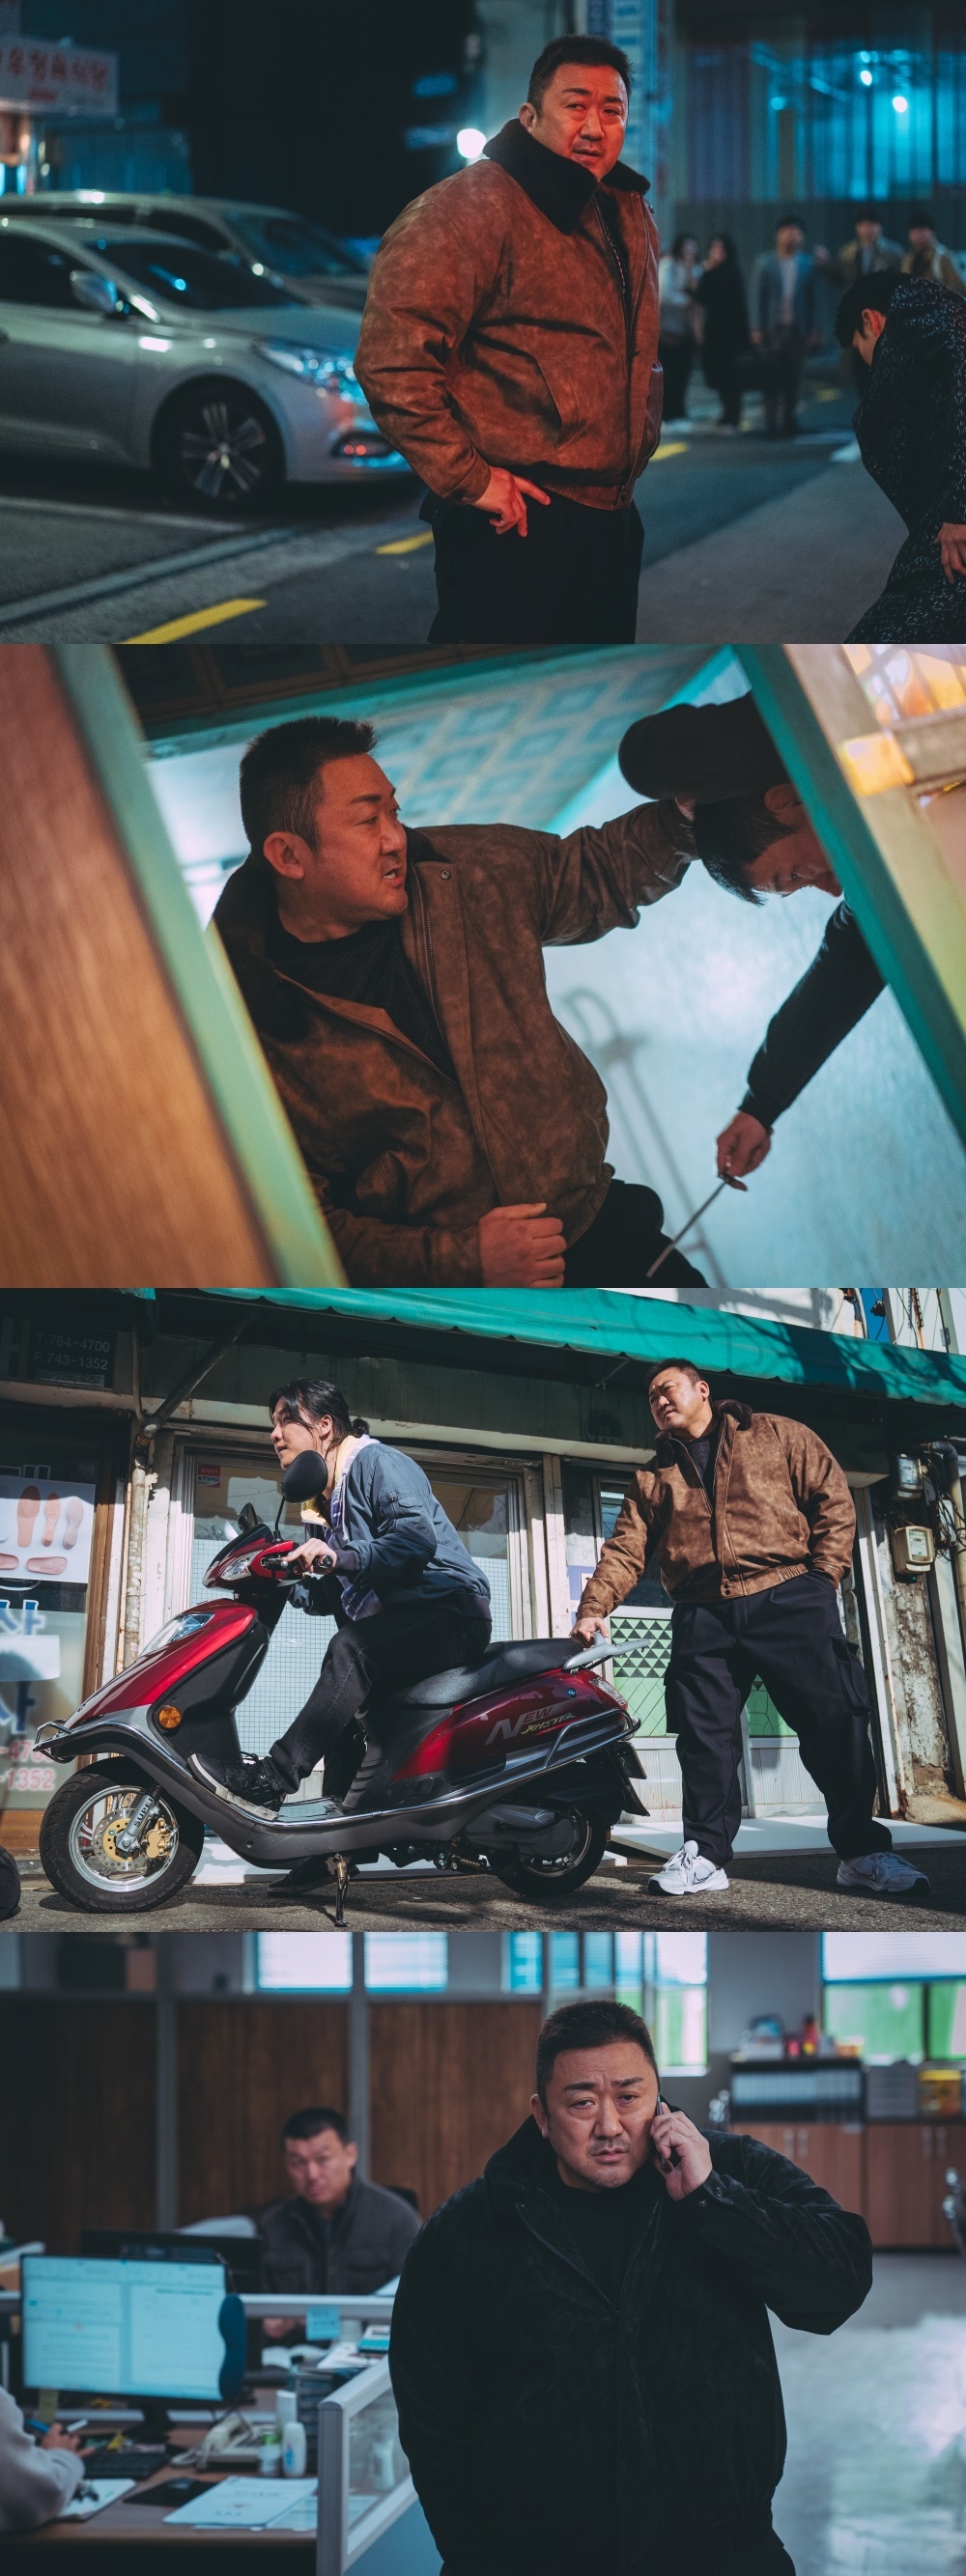 Ma Dong Seok Is Back Stronger Than Ever In Upcoming Crime Action Film “The Roundup : Punishment”